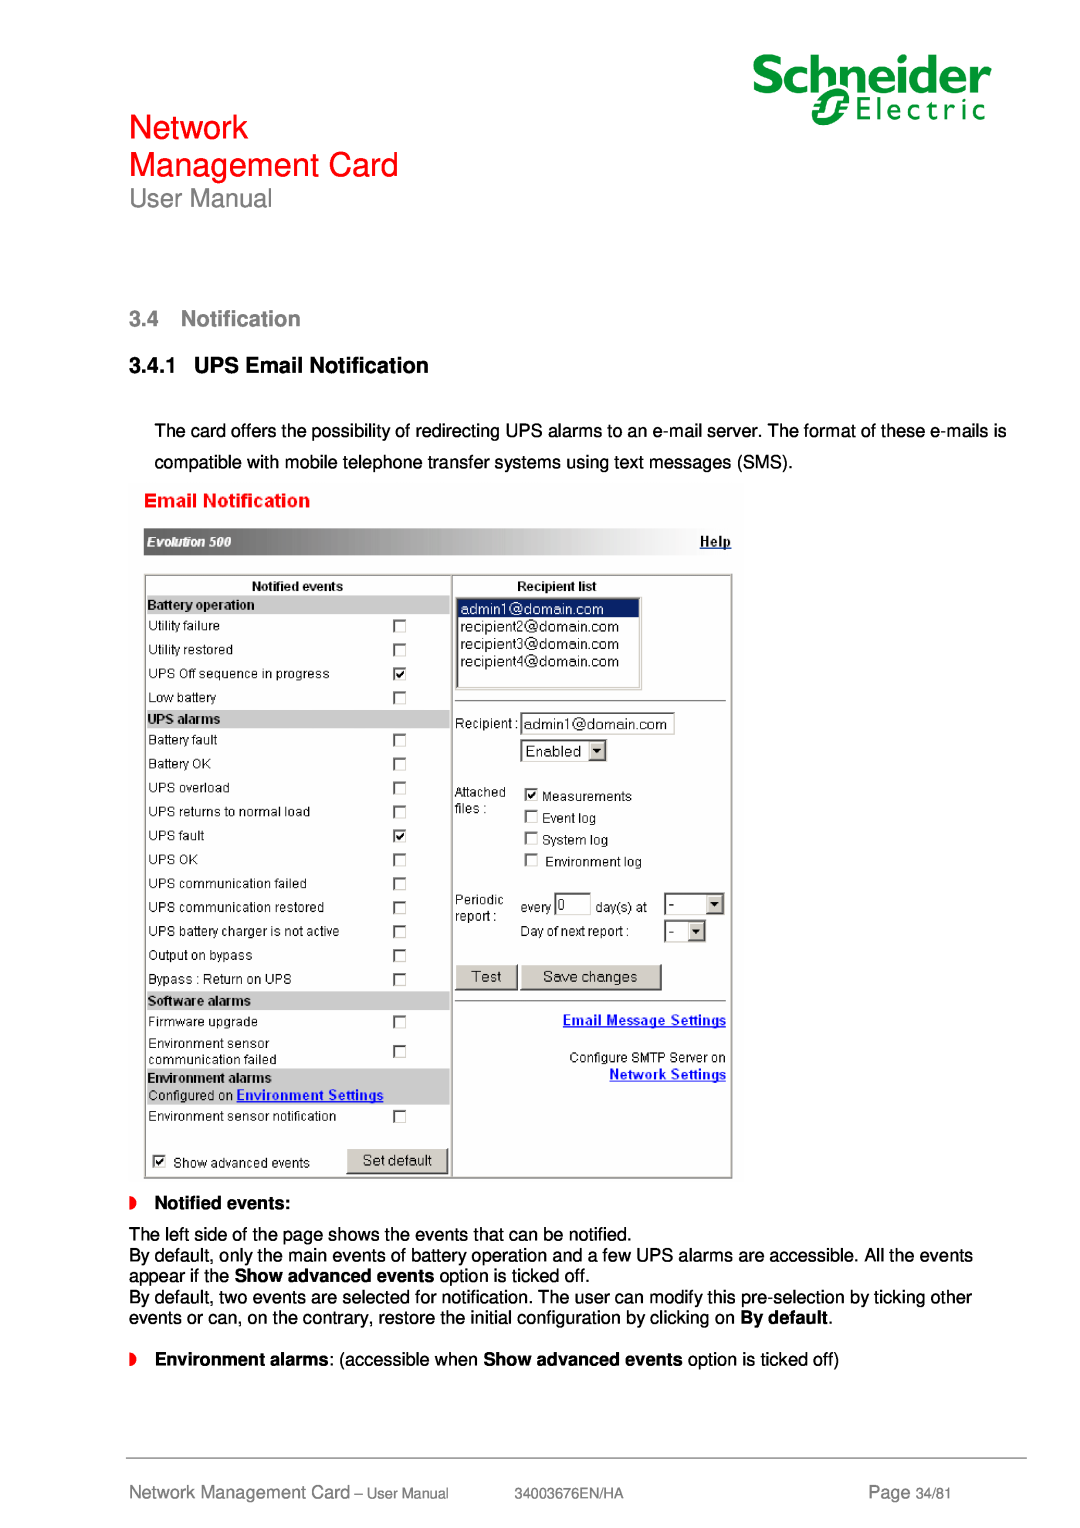 Schneider Electric 66846 UPS Email Notification, Network Management Card, User Manual, Notified events, Page 34/81 